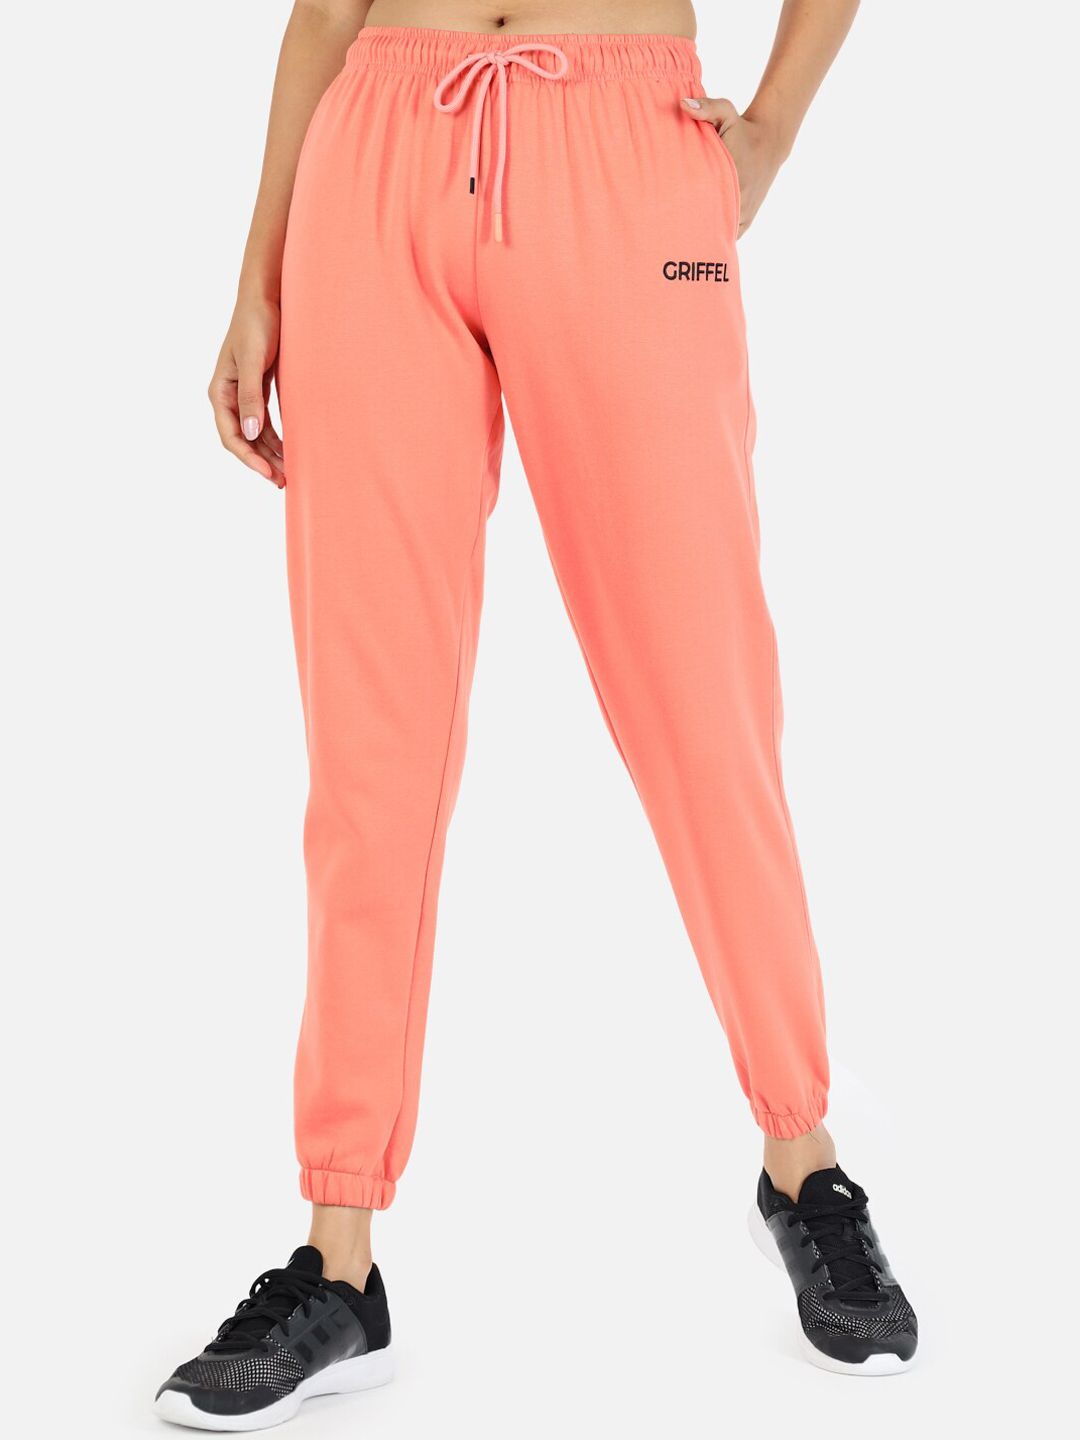 GRIFFEL Women Peach Coloured Solid Cotton Jogger Price in India